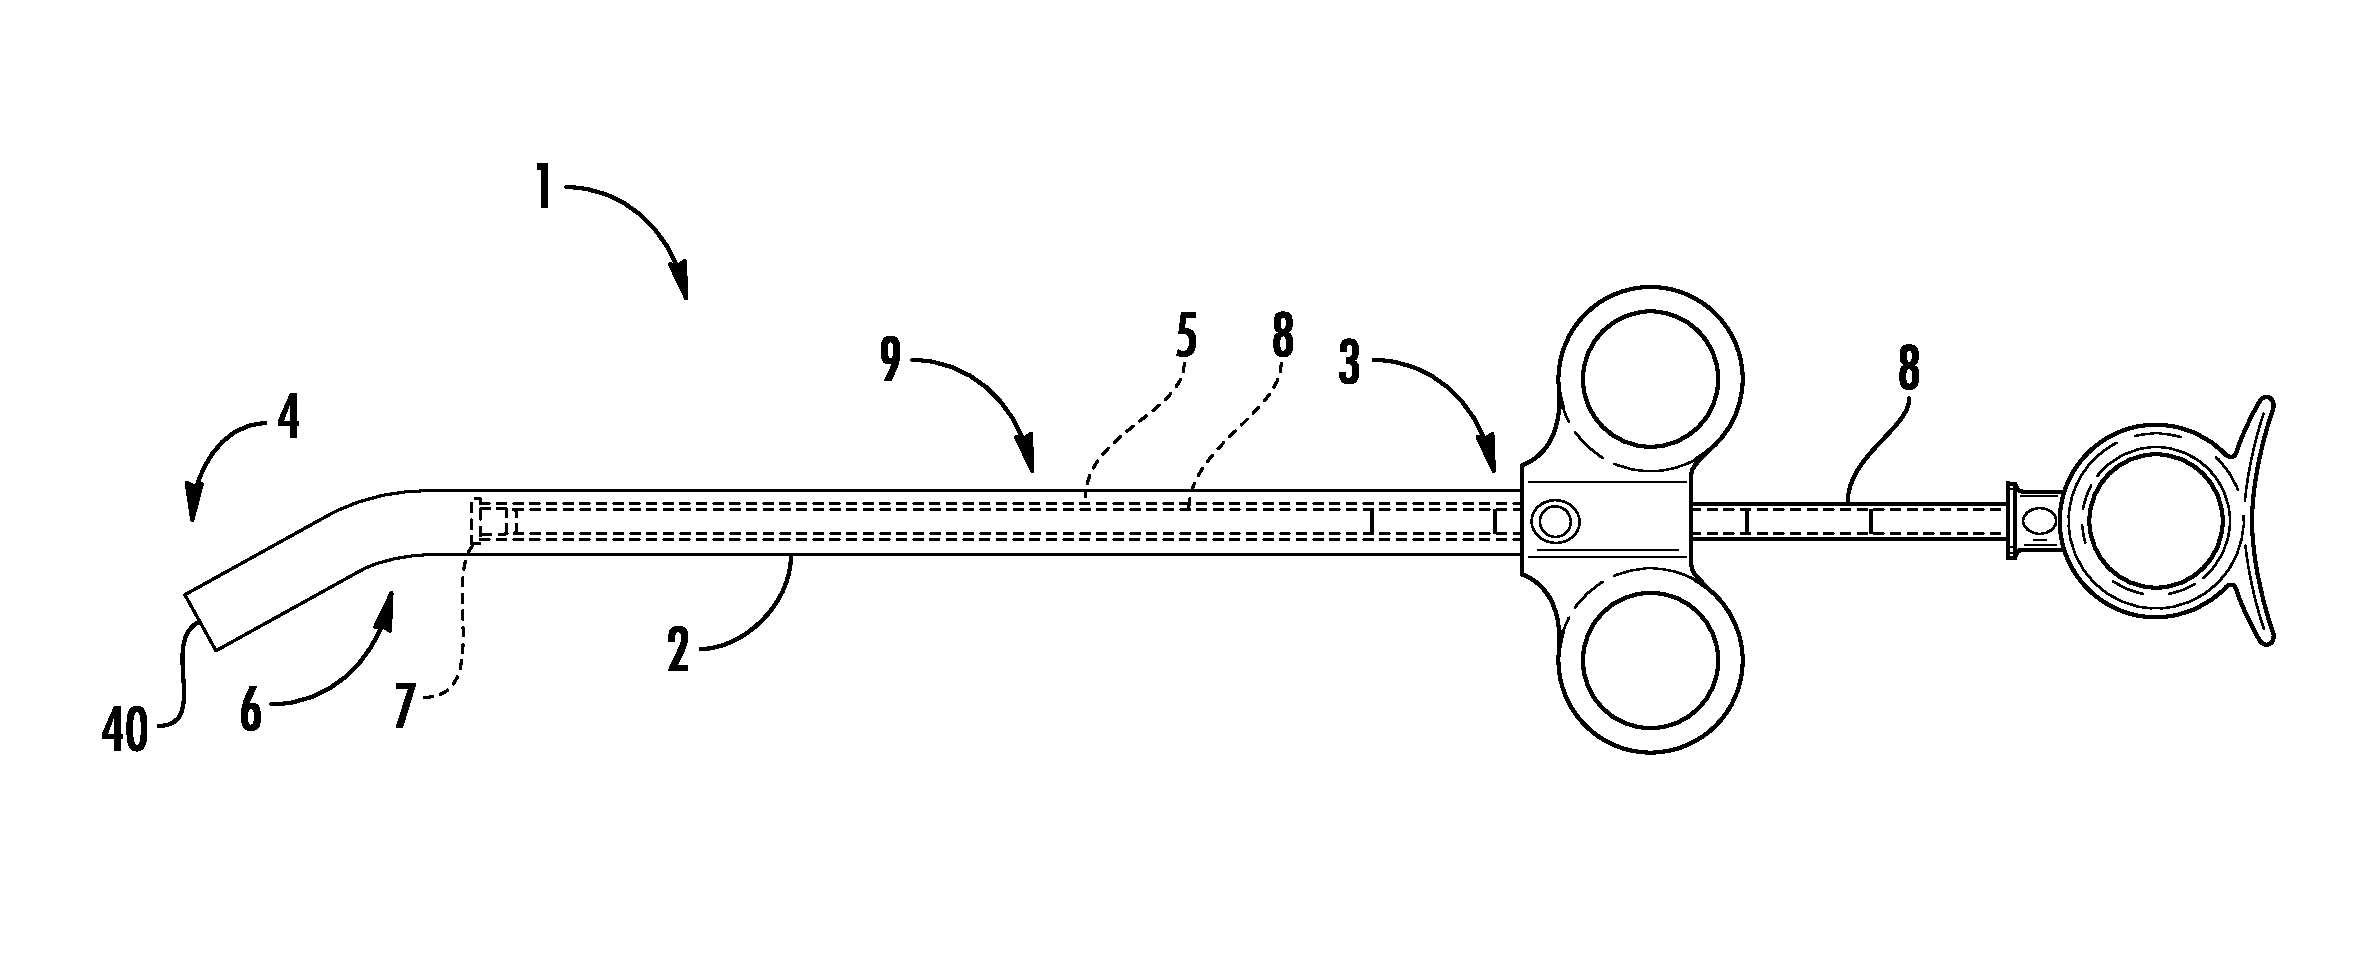 Injector device for introducing biocompatible material into deep anatomical areas